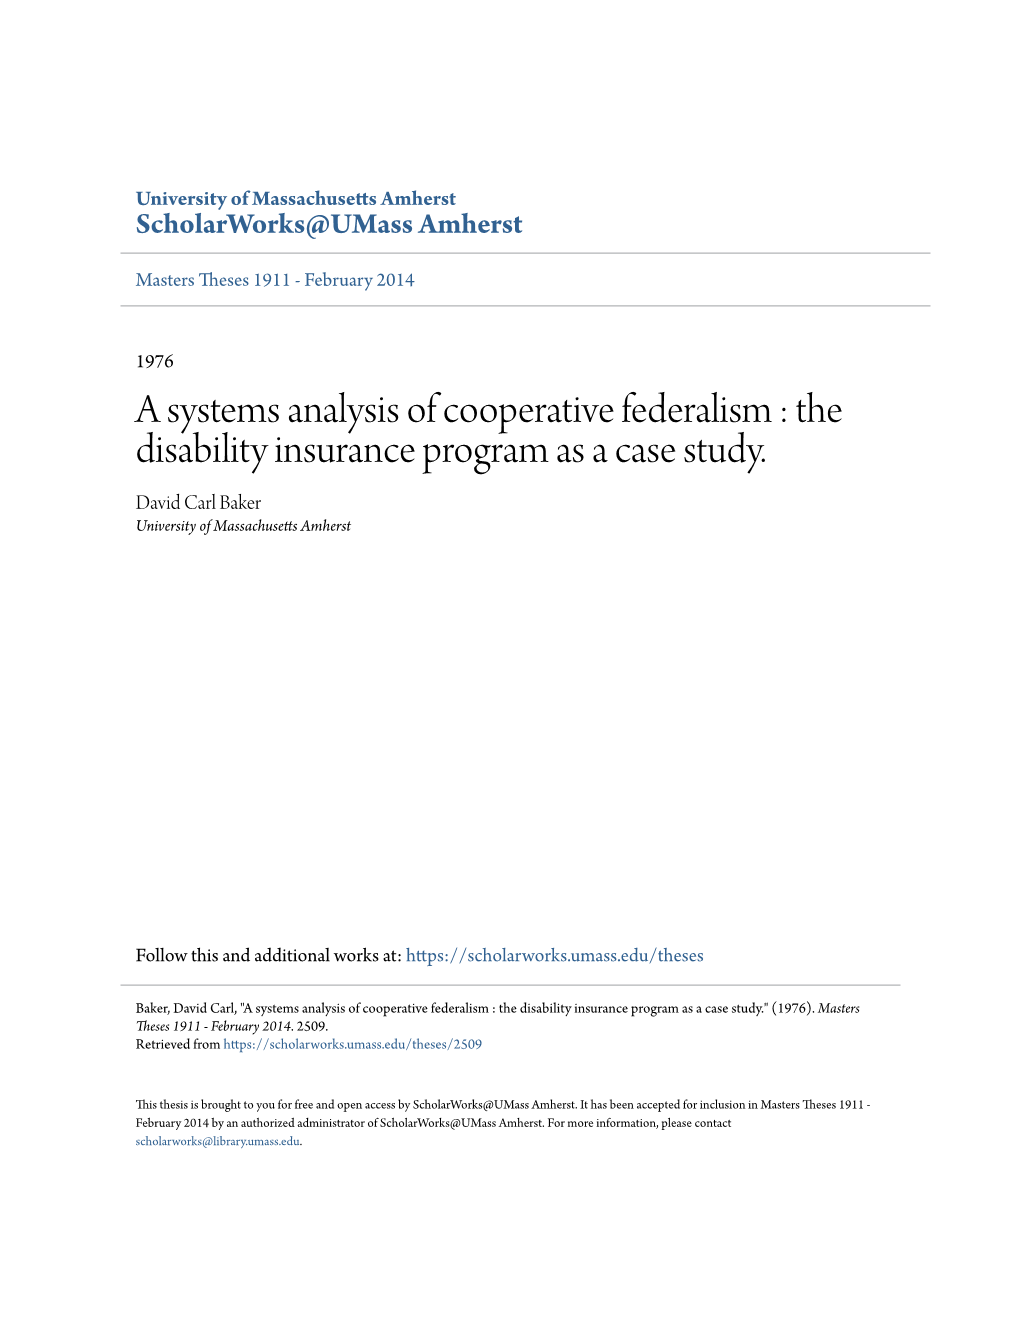 A Systems Analysis of Cooperative Federalism : the Disability Insurance Program As a Case Study